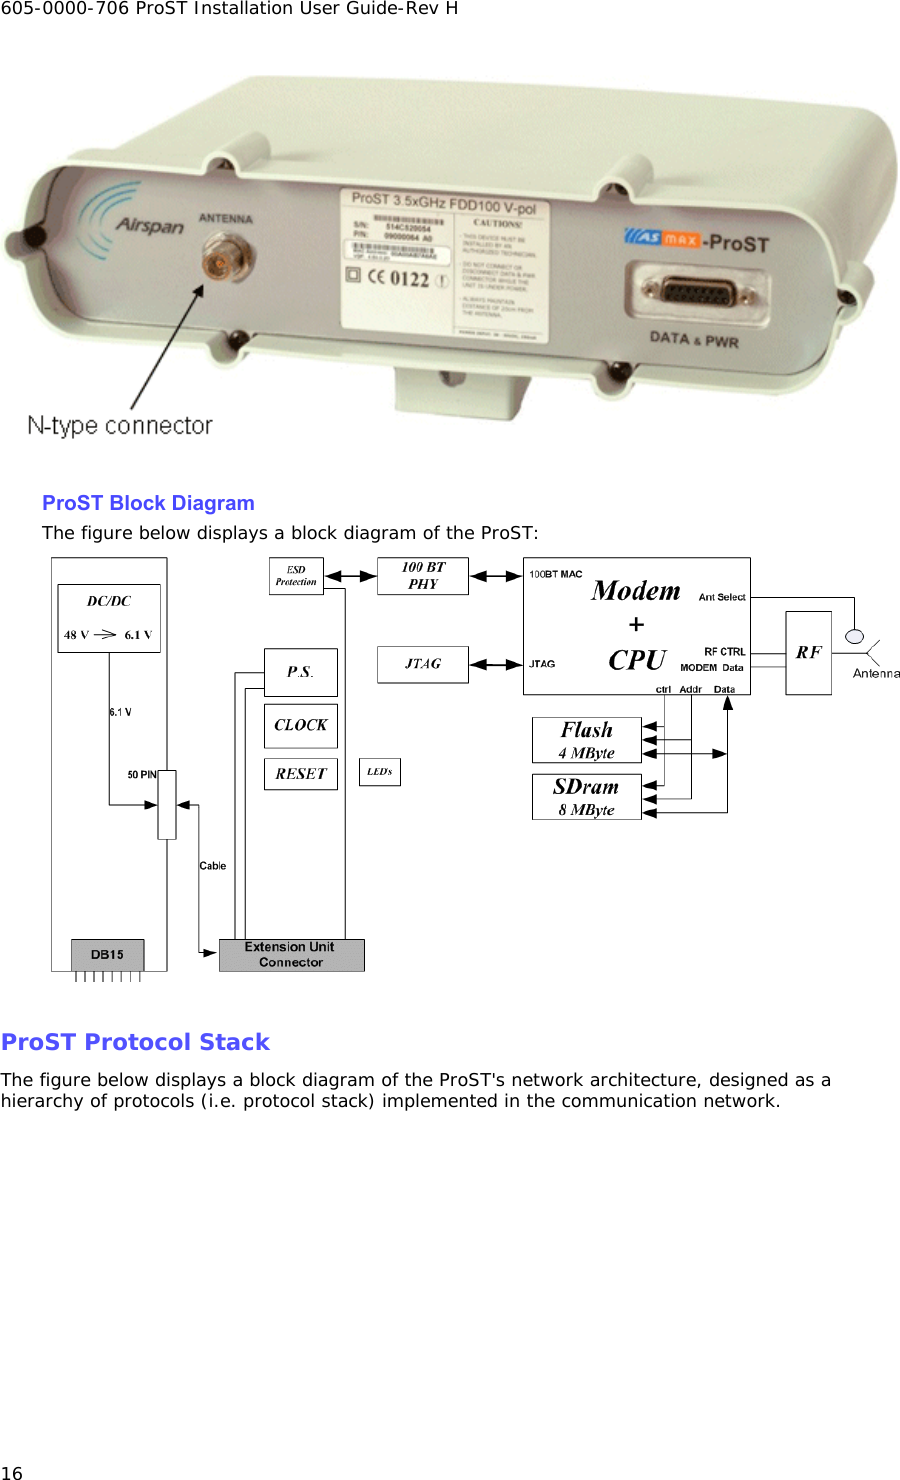 605-0000-706 ProST Installation User Guide-Rev H 16   ProST Block Diagram The figure below displays a block diagram of the ProST:   ProST Protocol Stack The figure below displays a block diagram of the ProST&apos;s network architecture, designed as a hierarchy of protocols (i.e. protocol stack) implemented in the communication network. 